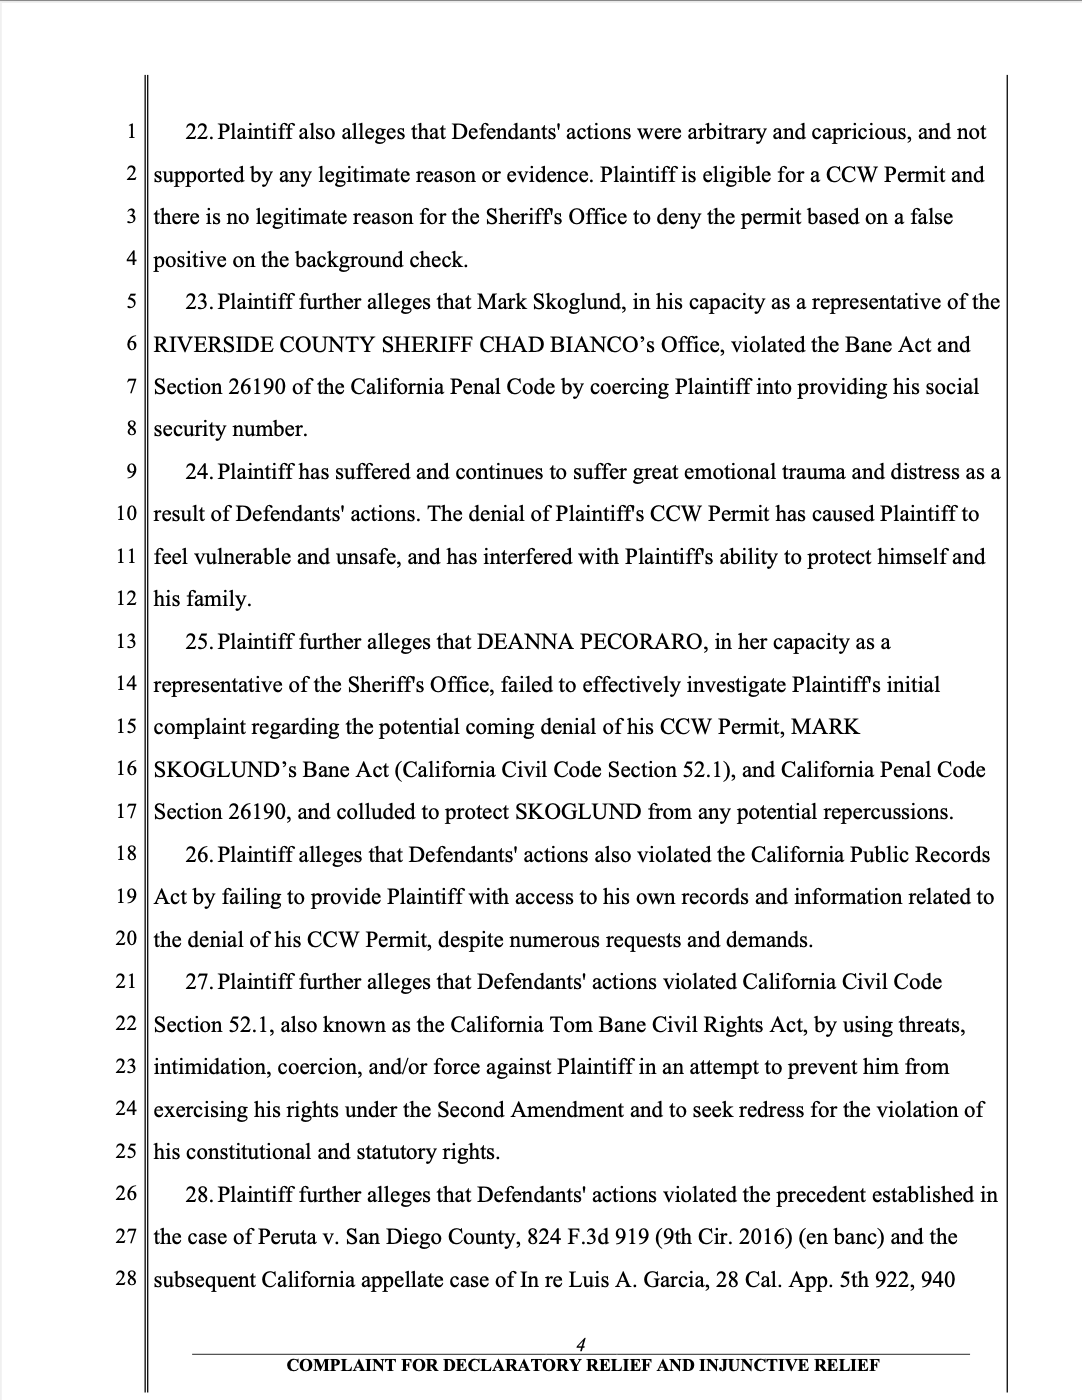 Riverside Sheriff Violation of the Bane Act Second Fourteenth Amendment and Constitutional Rights 4